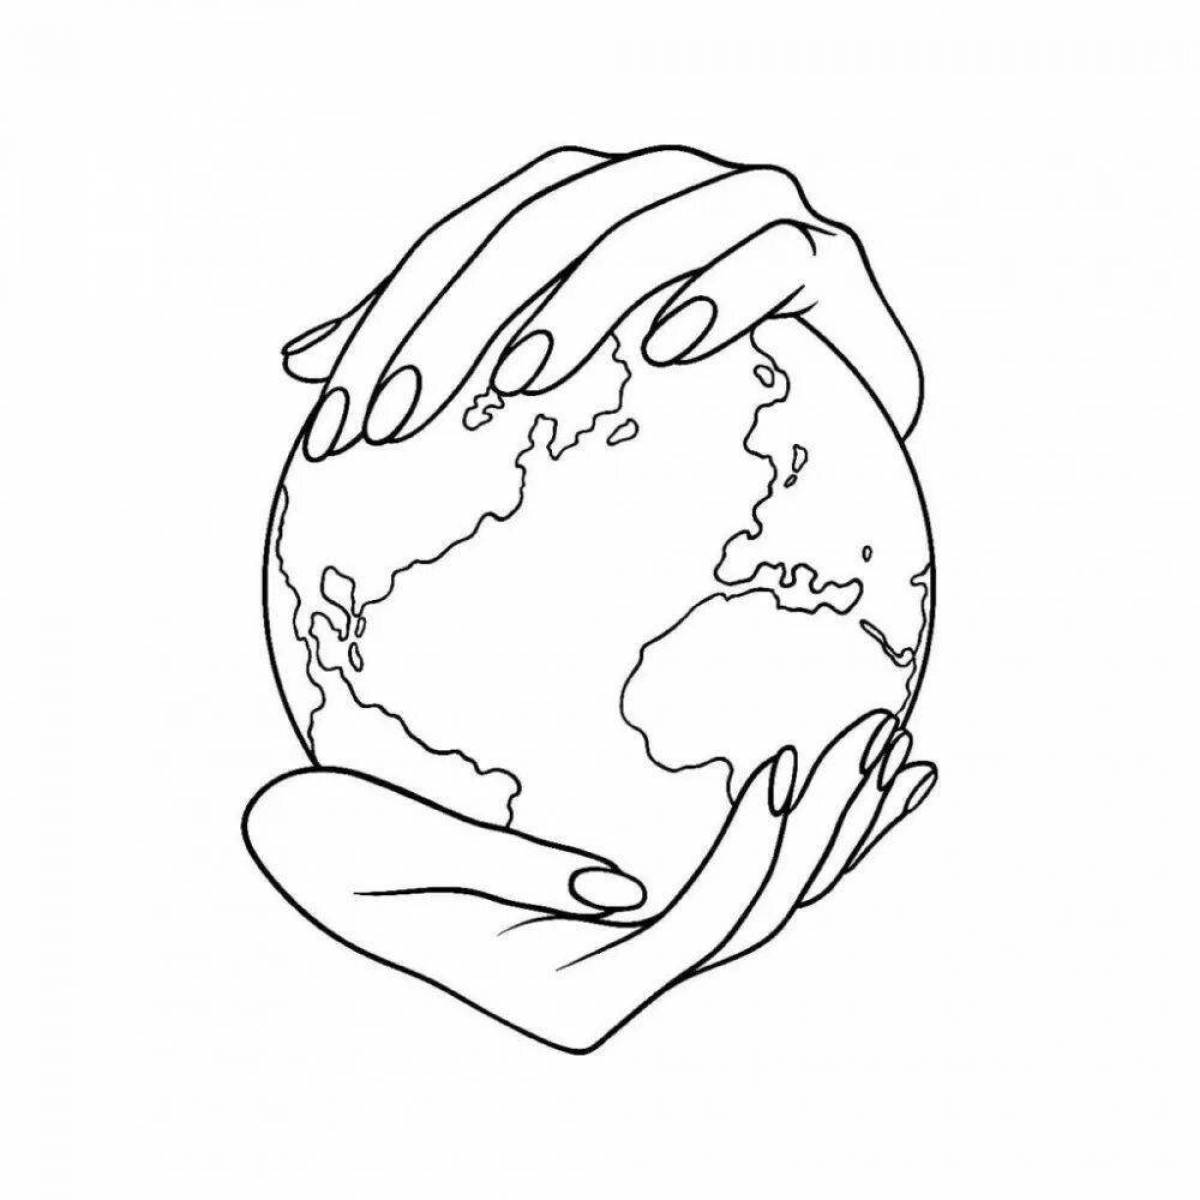 Adorable globe coloring for kids